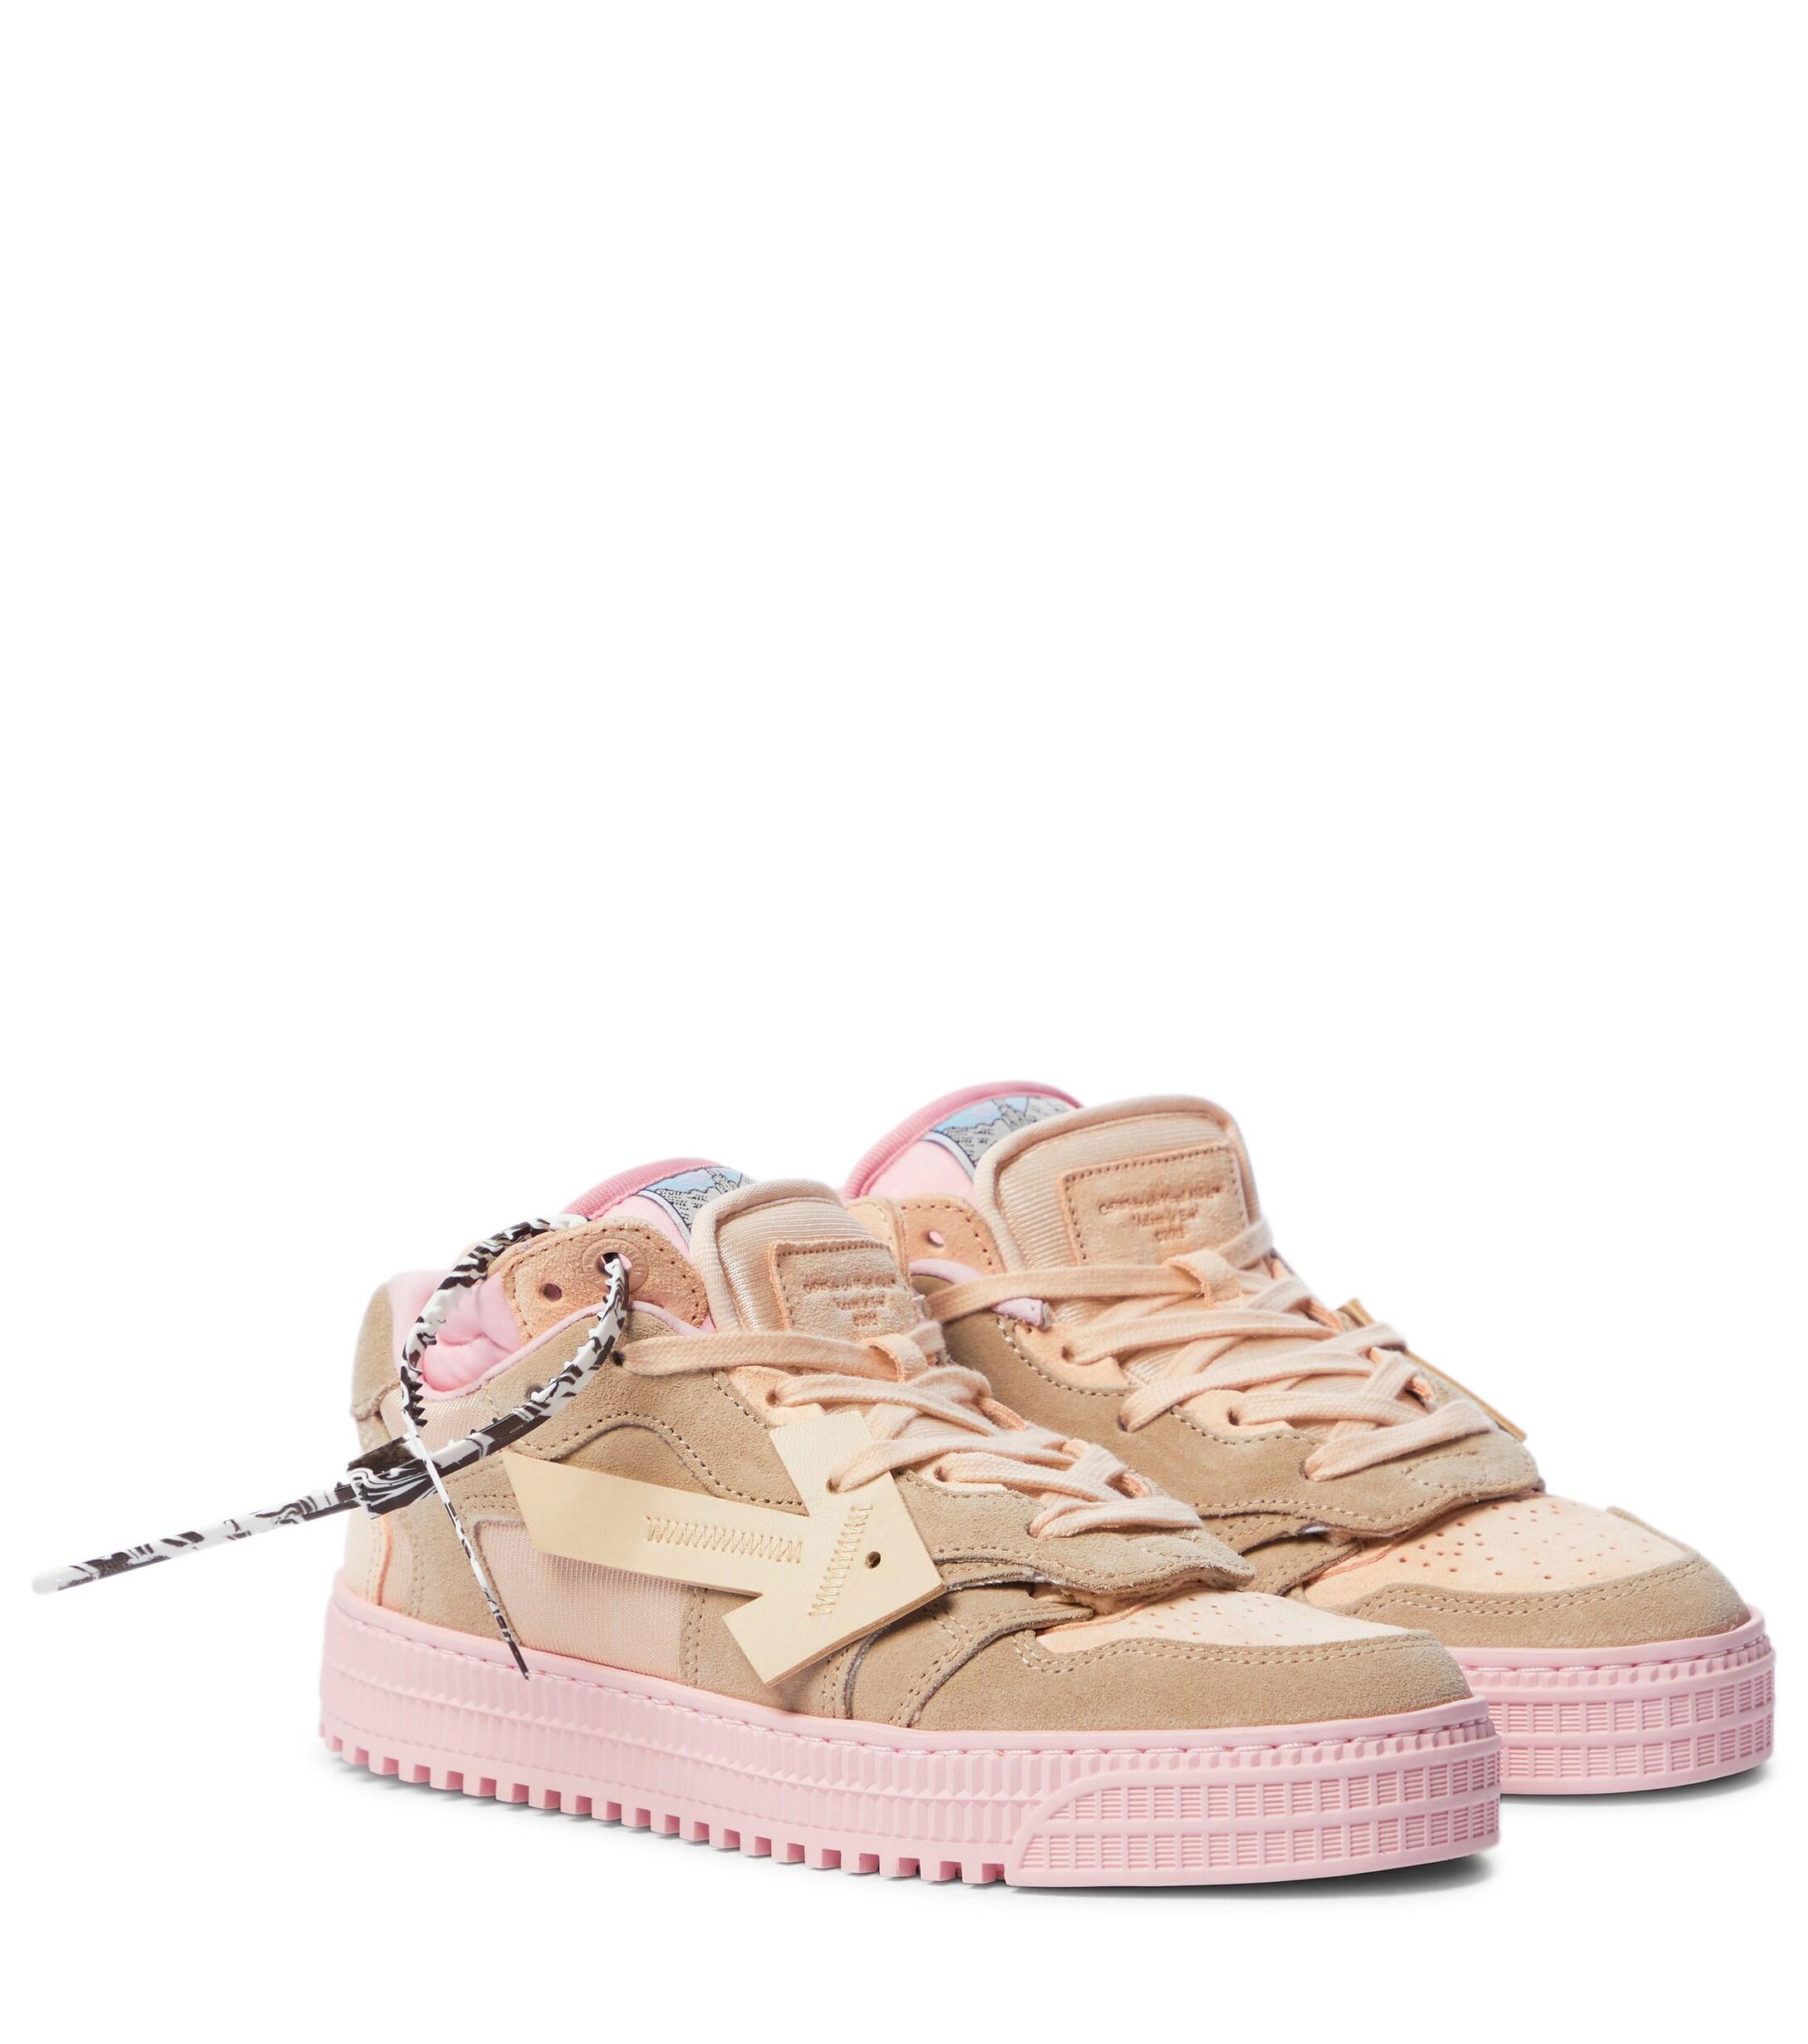 Off-White c/o Virgil Abloh Off-court 3.0 Suede Sneakers in Pink | Lyst UK